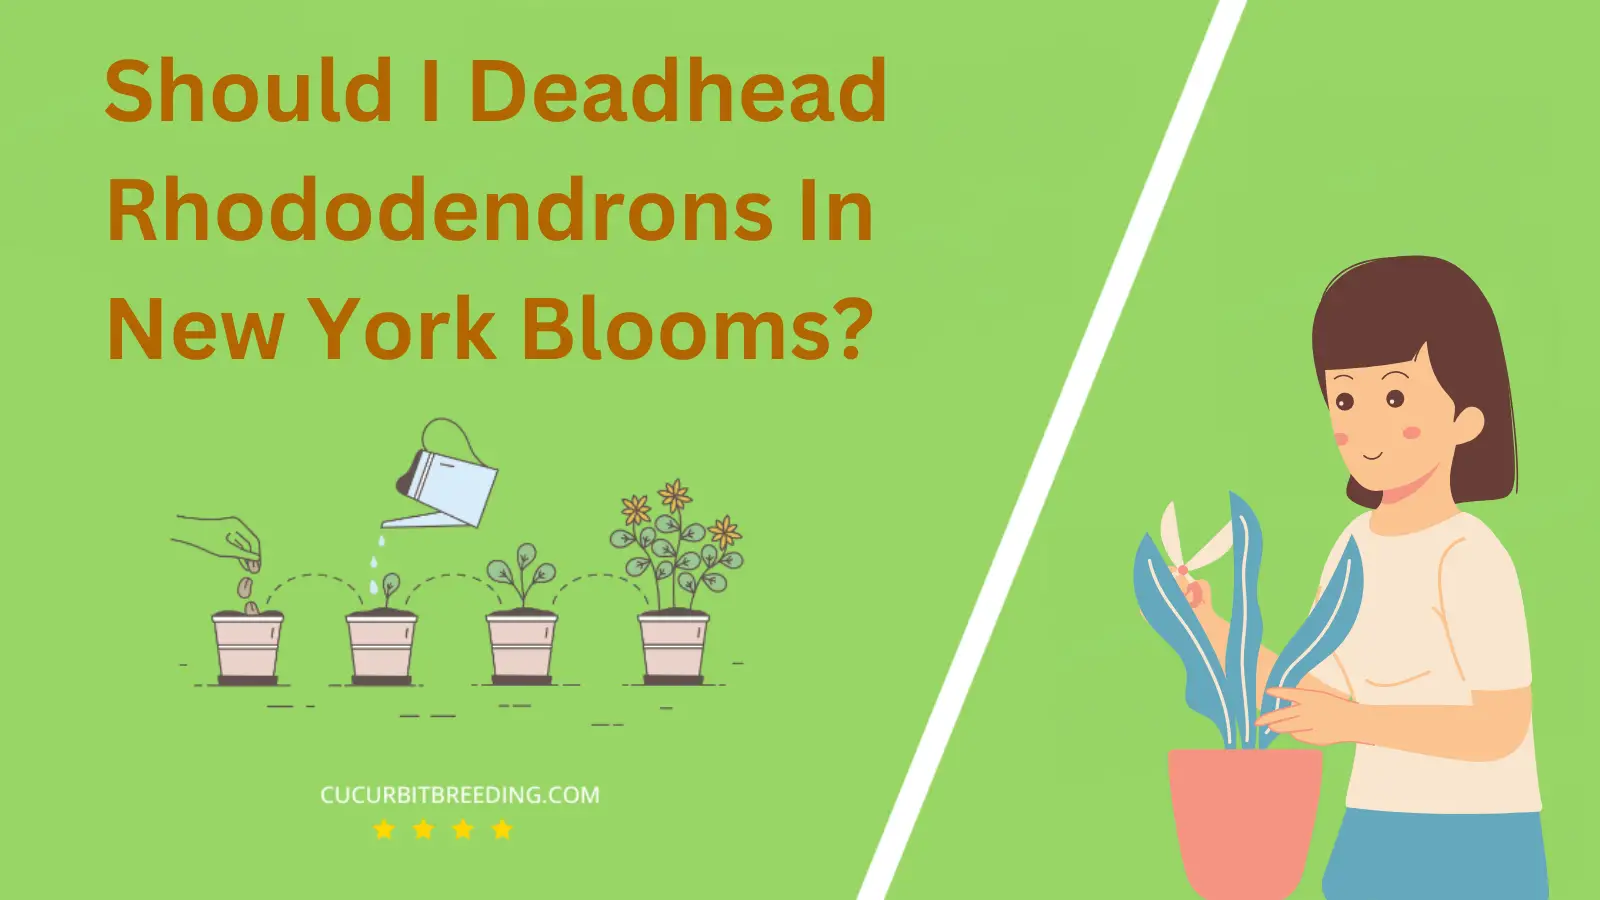 Should I Deadhead Rhododendrons In New York Blooms?